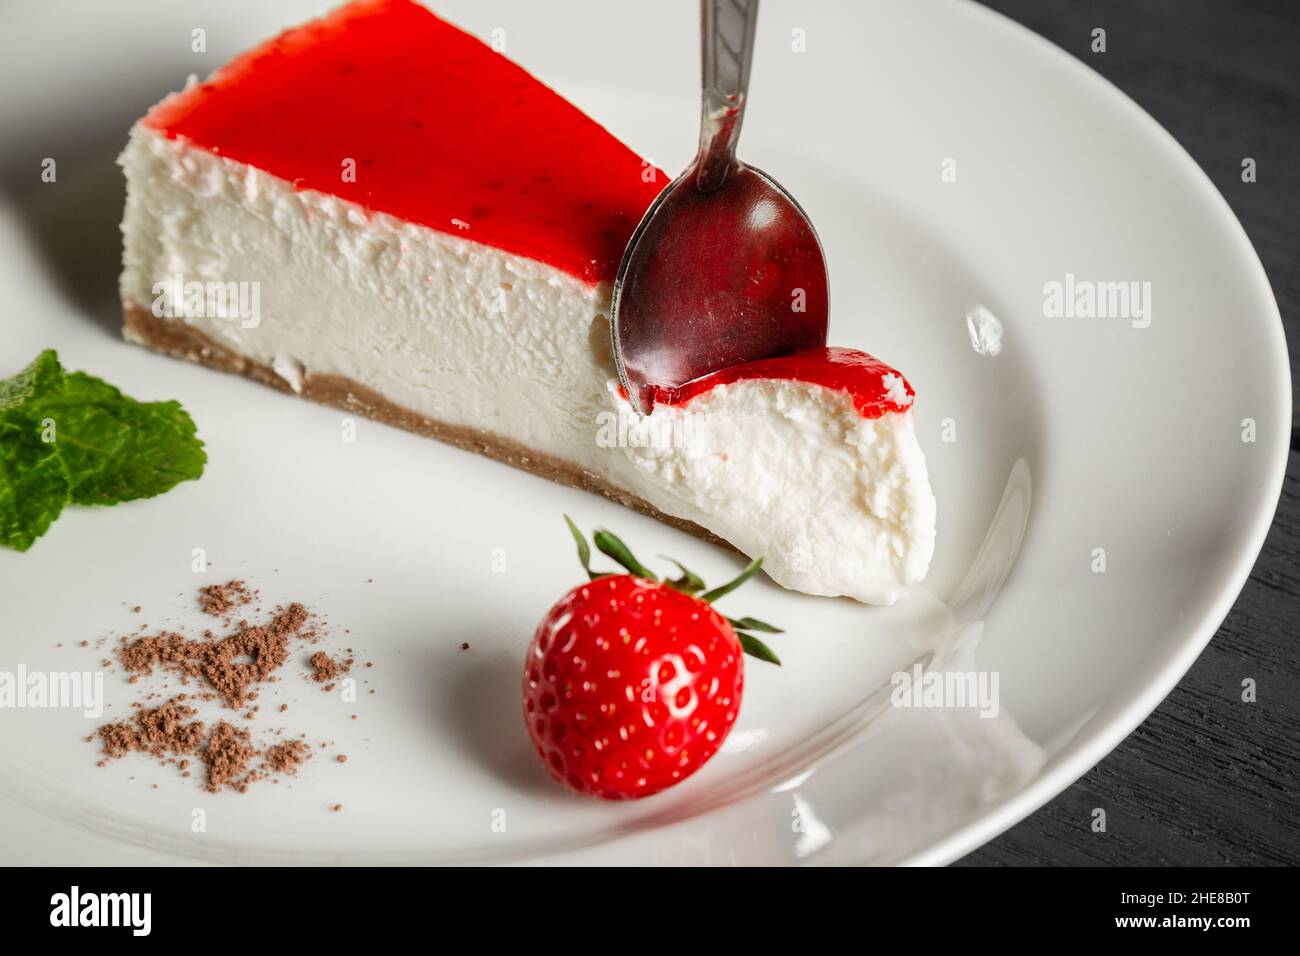 Strawberry cheesecake on a white plate. Stock Photo